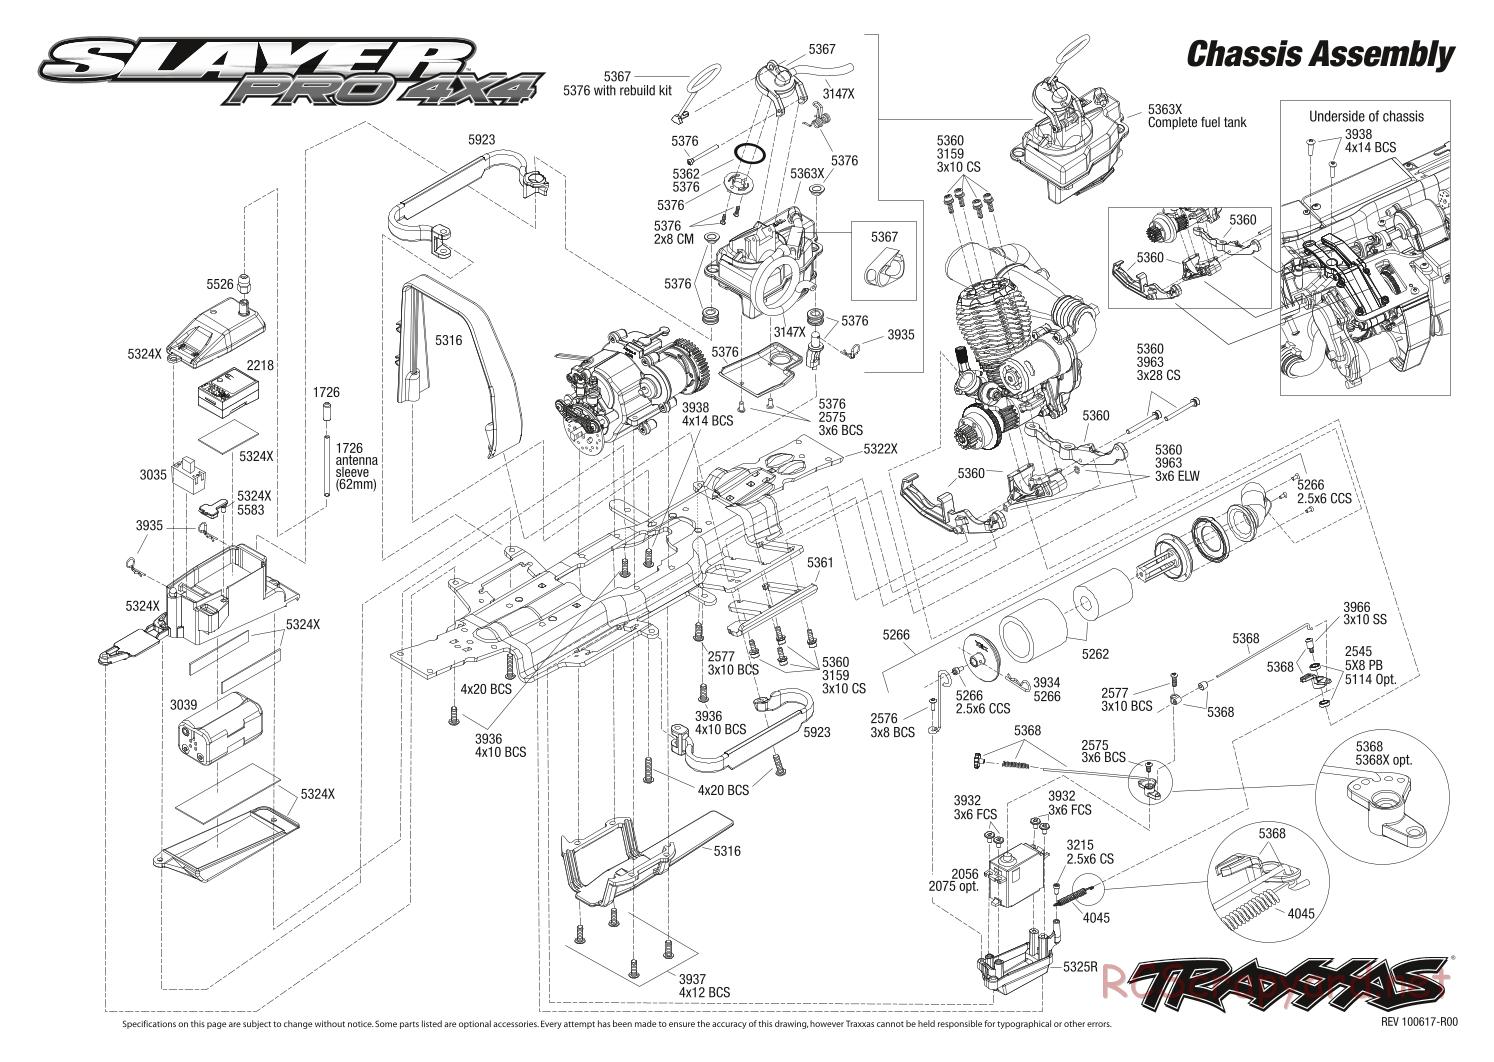 Traxxas - Slayer Pro 4x4 - Exploded Views - Page 1